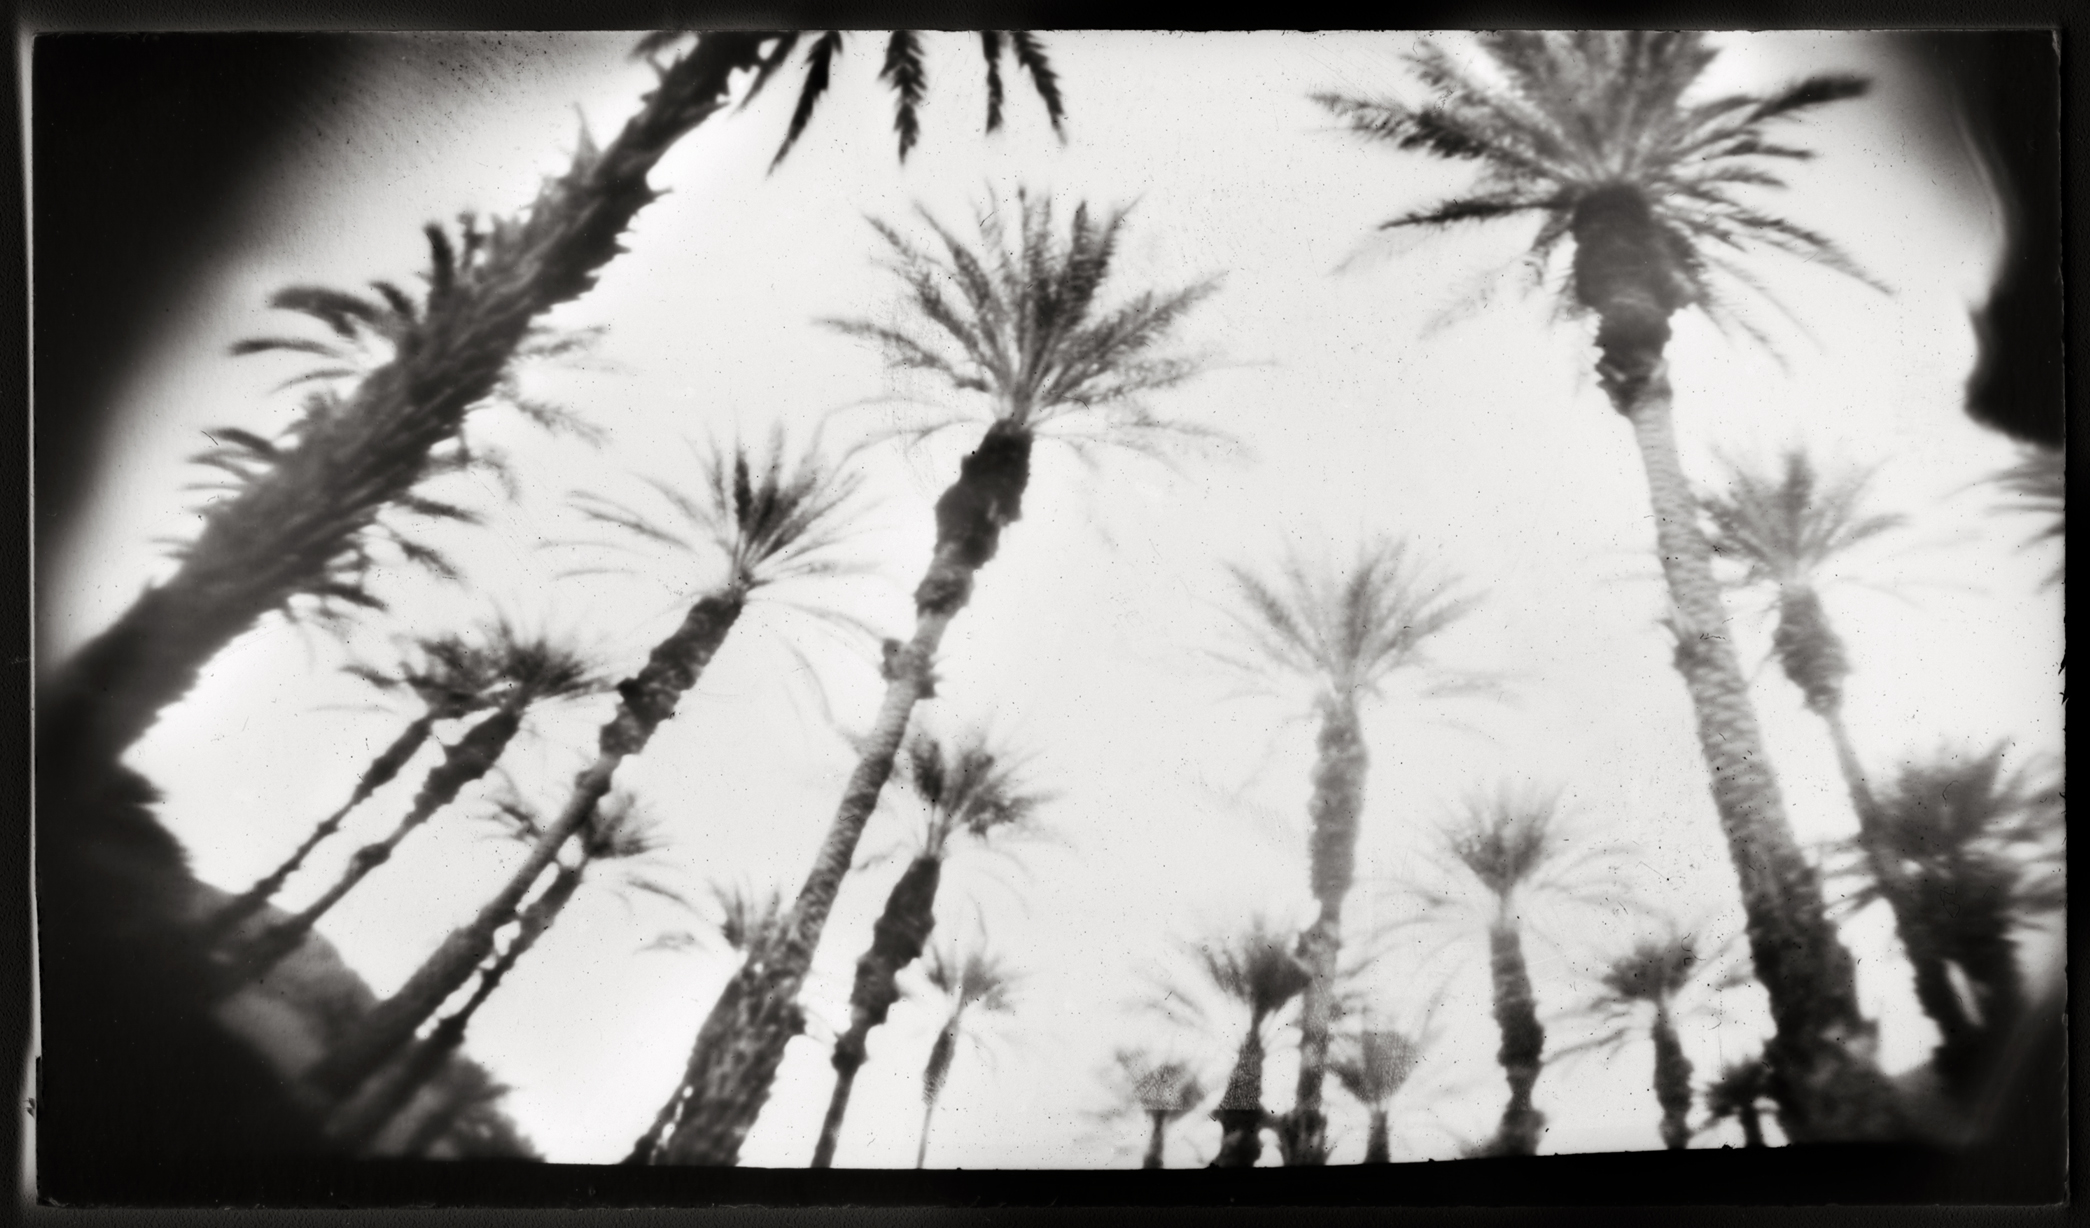 Black and white photographic paper negative pinhole photograph of palm trees